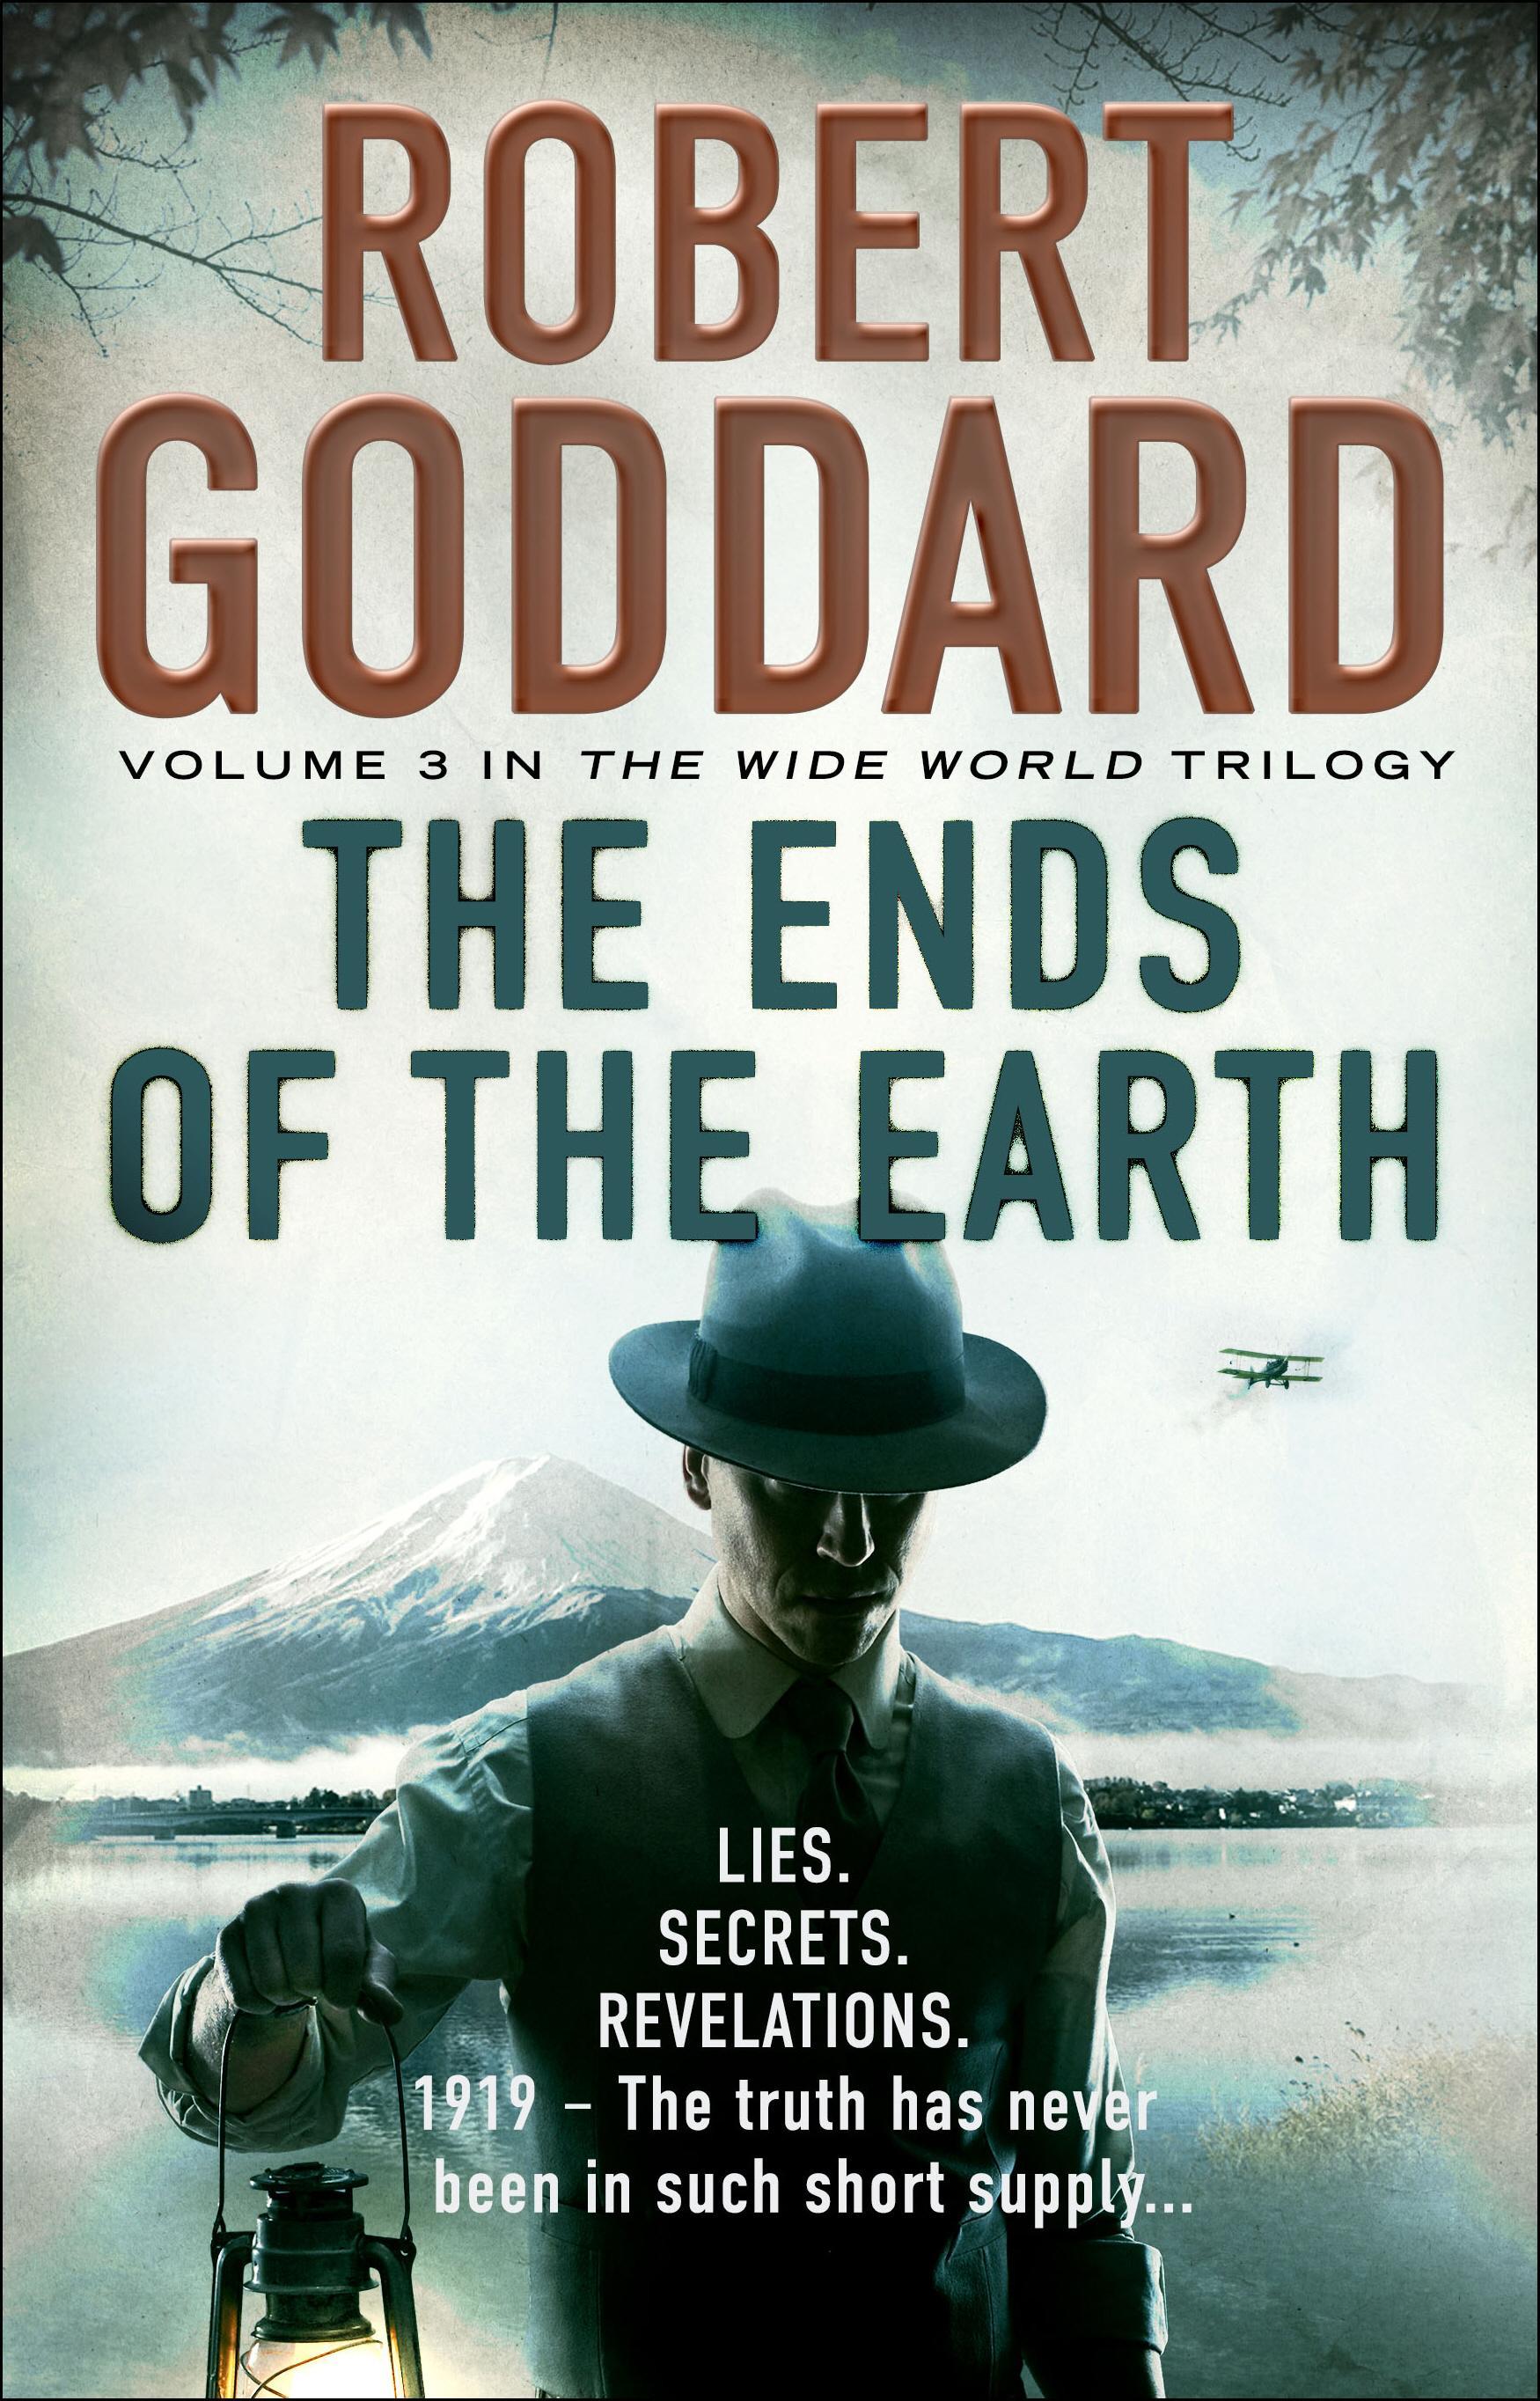 Ends of the Earth - Robert Goddard